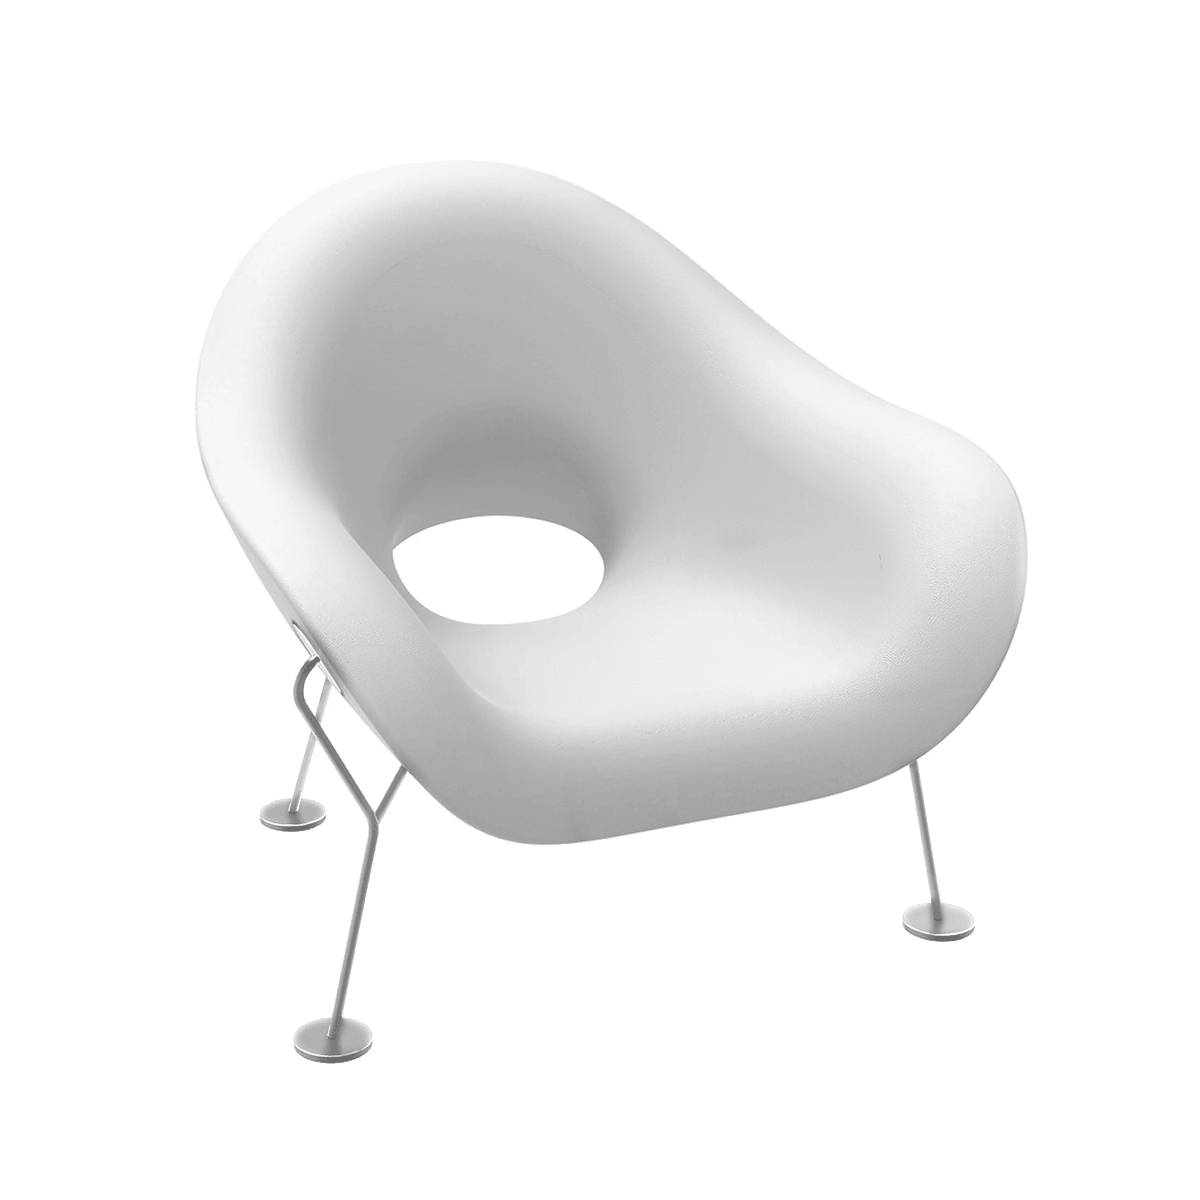 PUPA OUTDOOR armchair white with chrome base, QeeBoo, Eye on Design